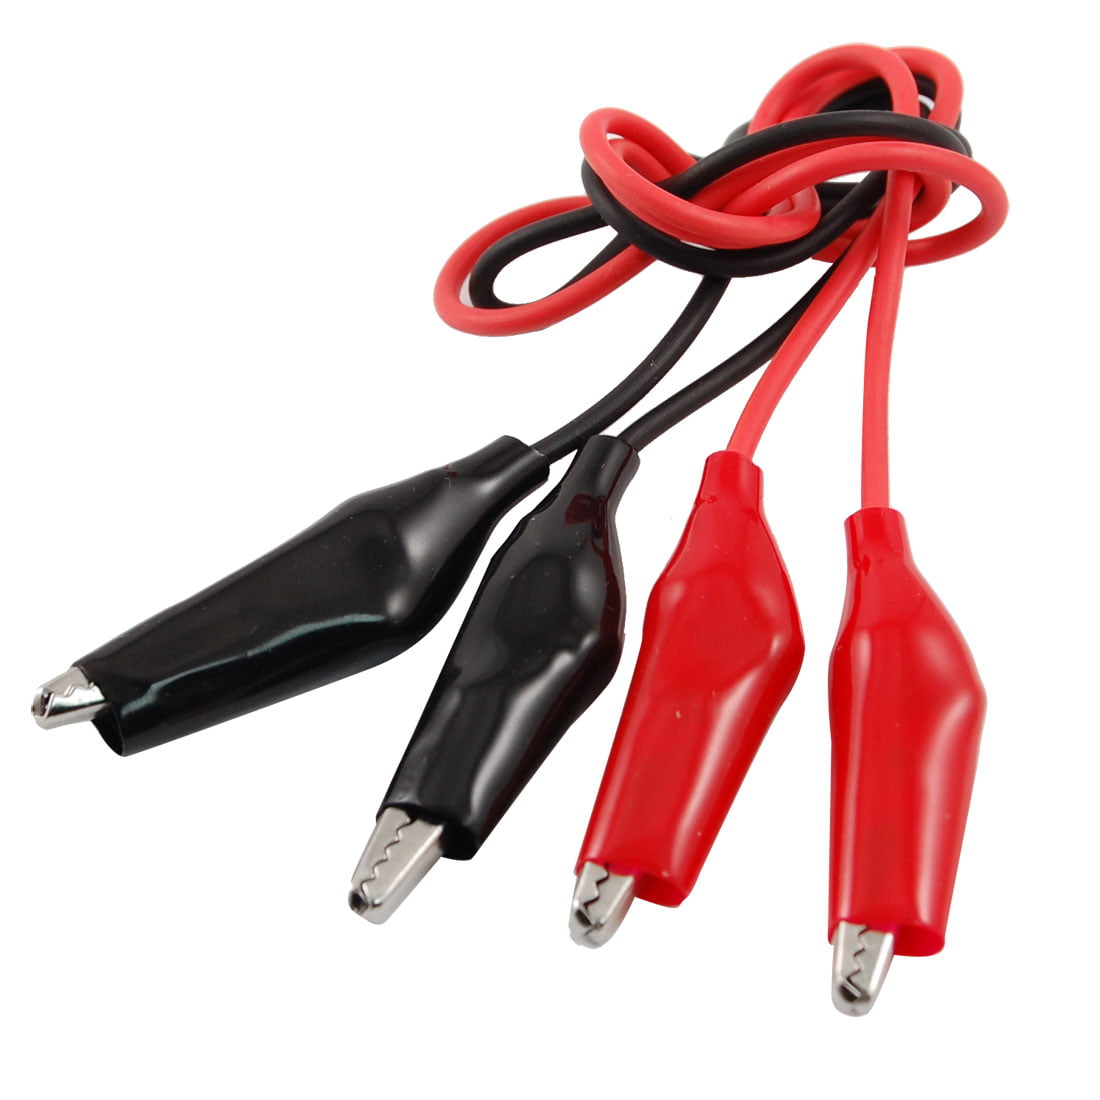 Black Clip Probe Meter Alligator Clip Test Wire 8pcs 35mm Double ended Red 